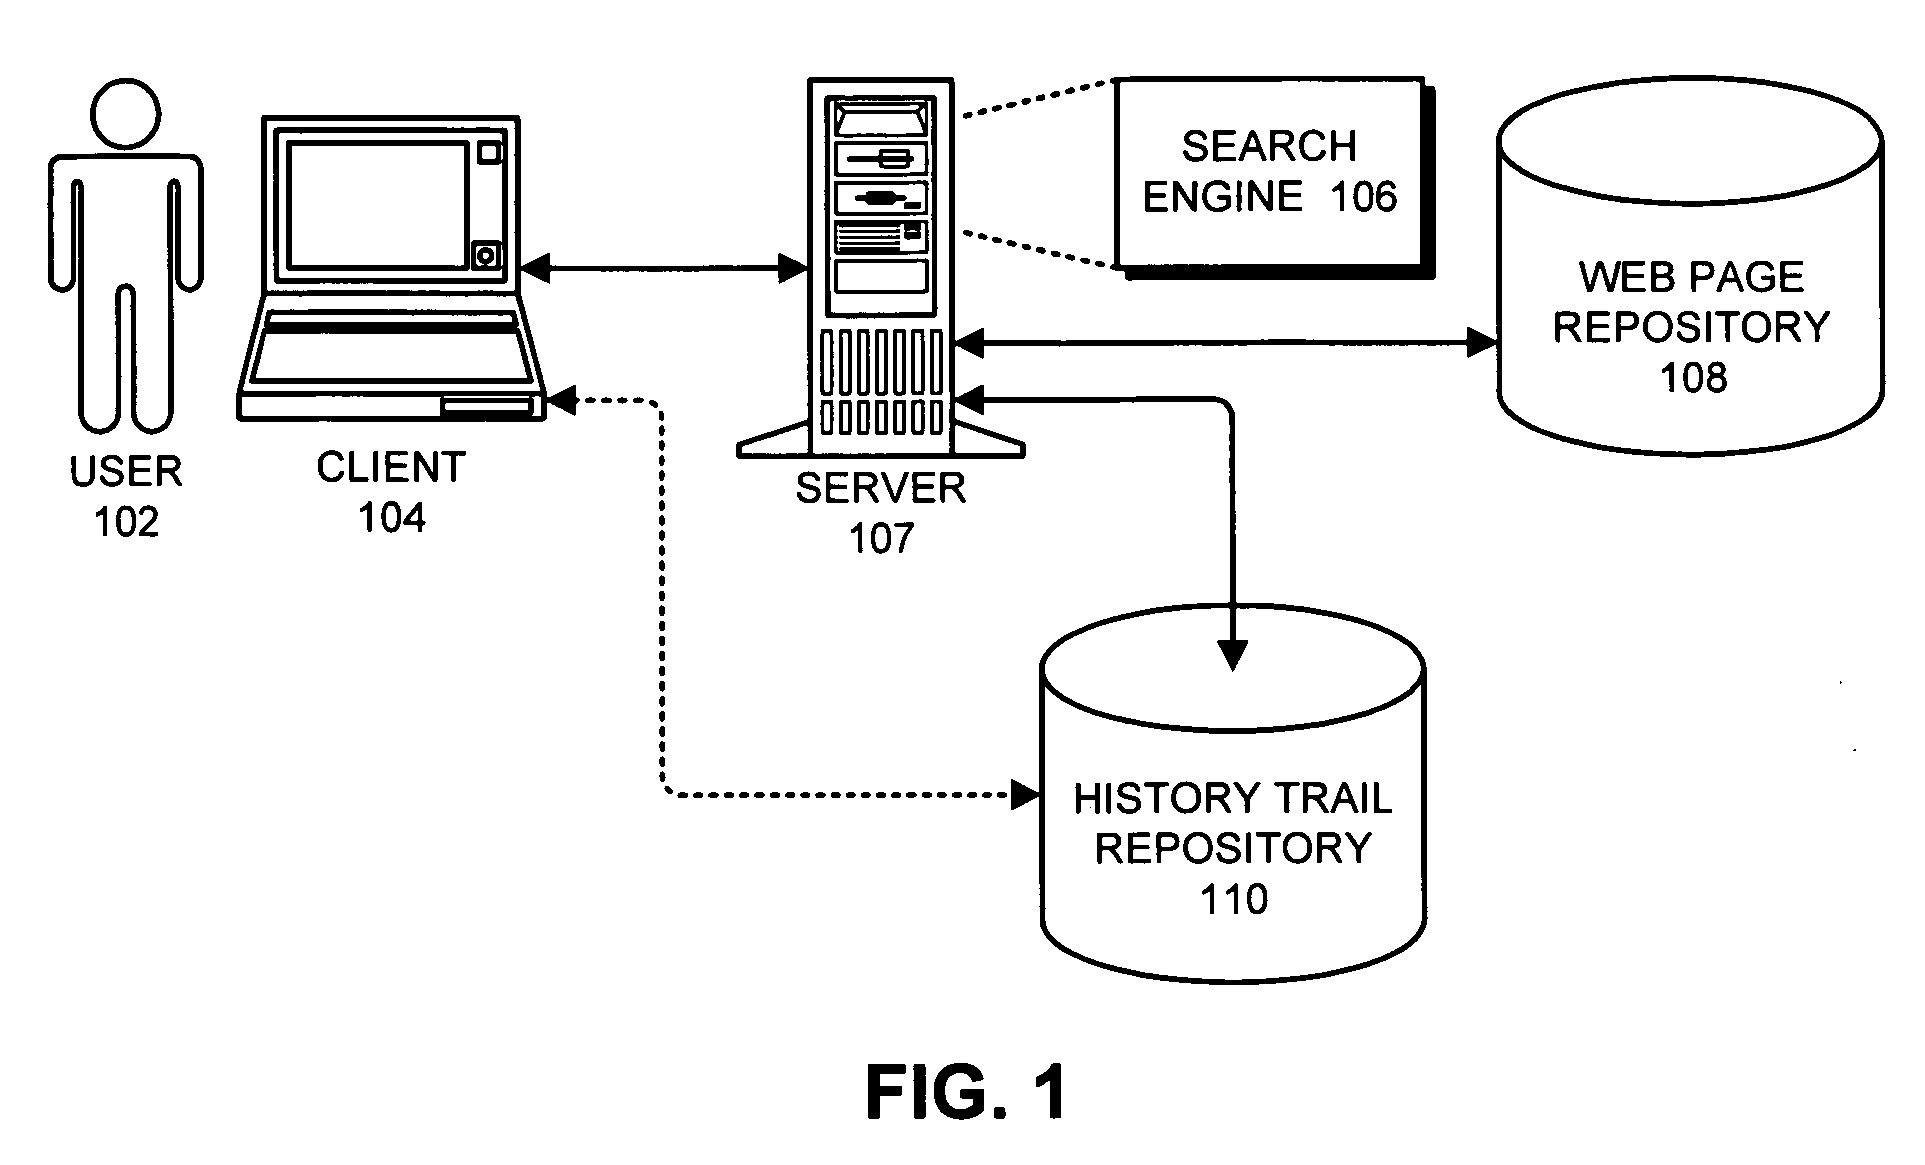 Method and apparatus for accessing history trails for previous search sessions